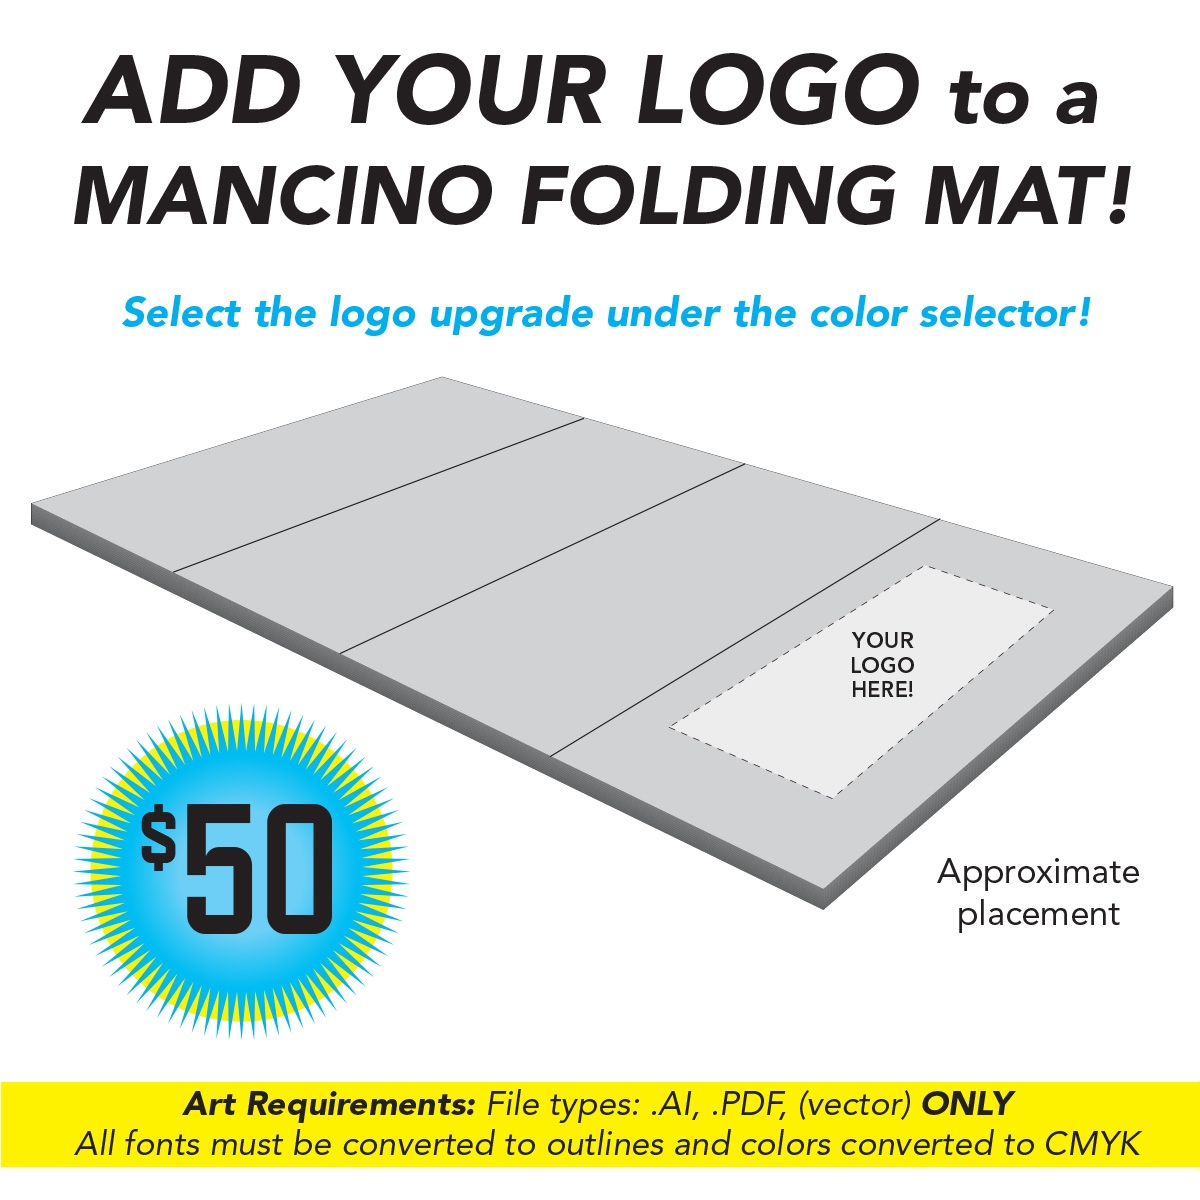 customize your cheer gym with your logo and team colors on a mancino folding mat - mancino mats